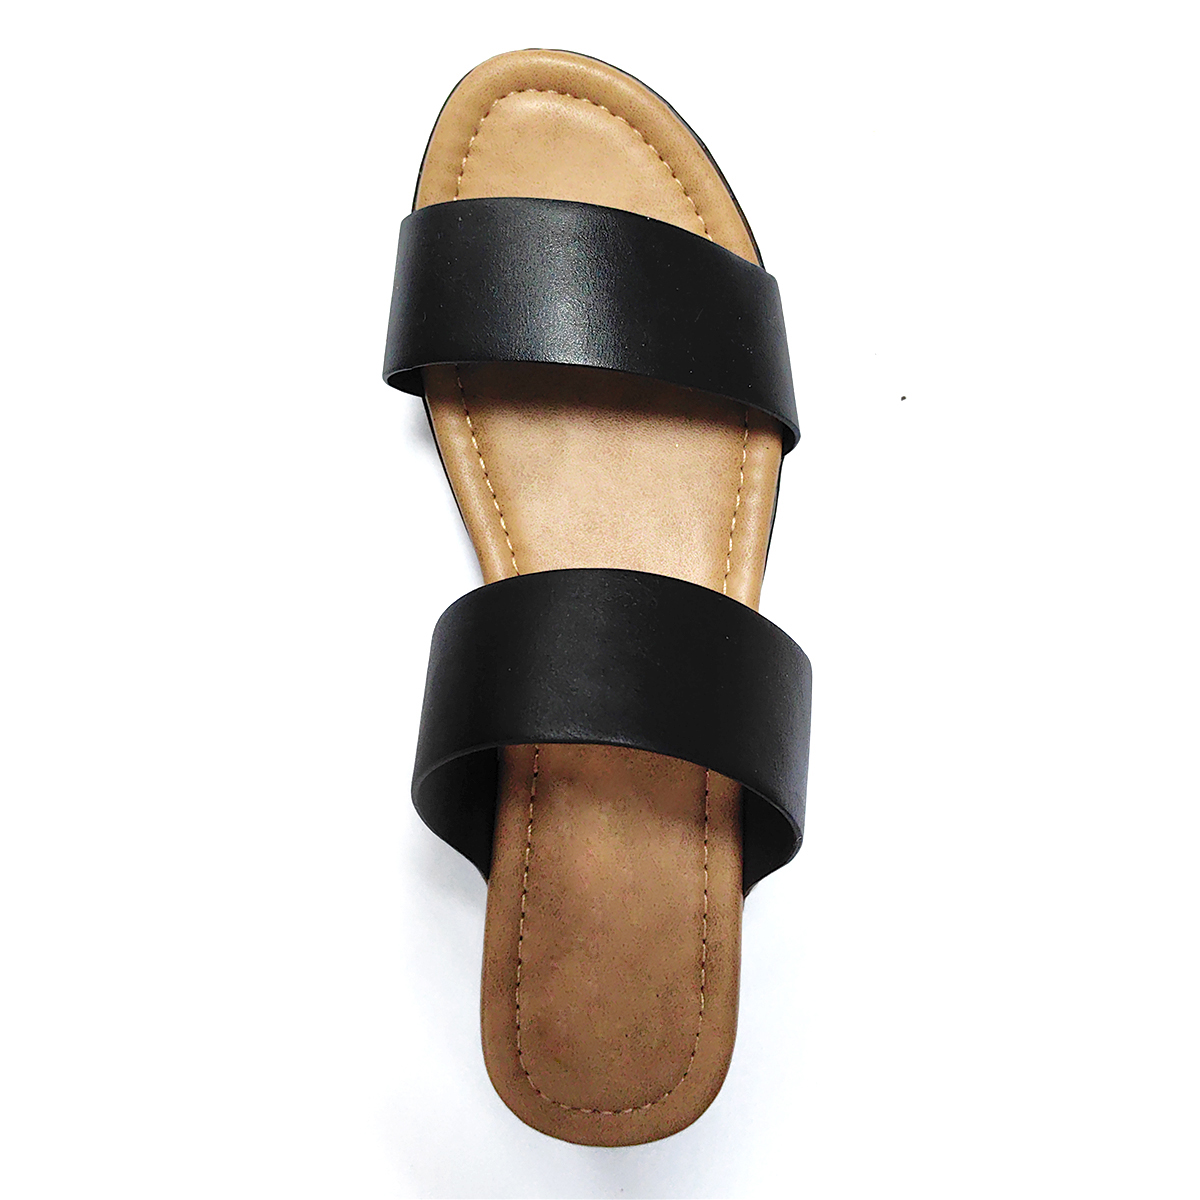 Wedge leather sandals